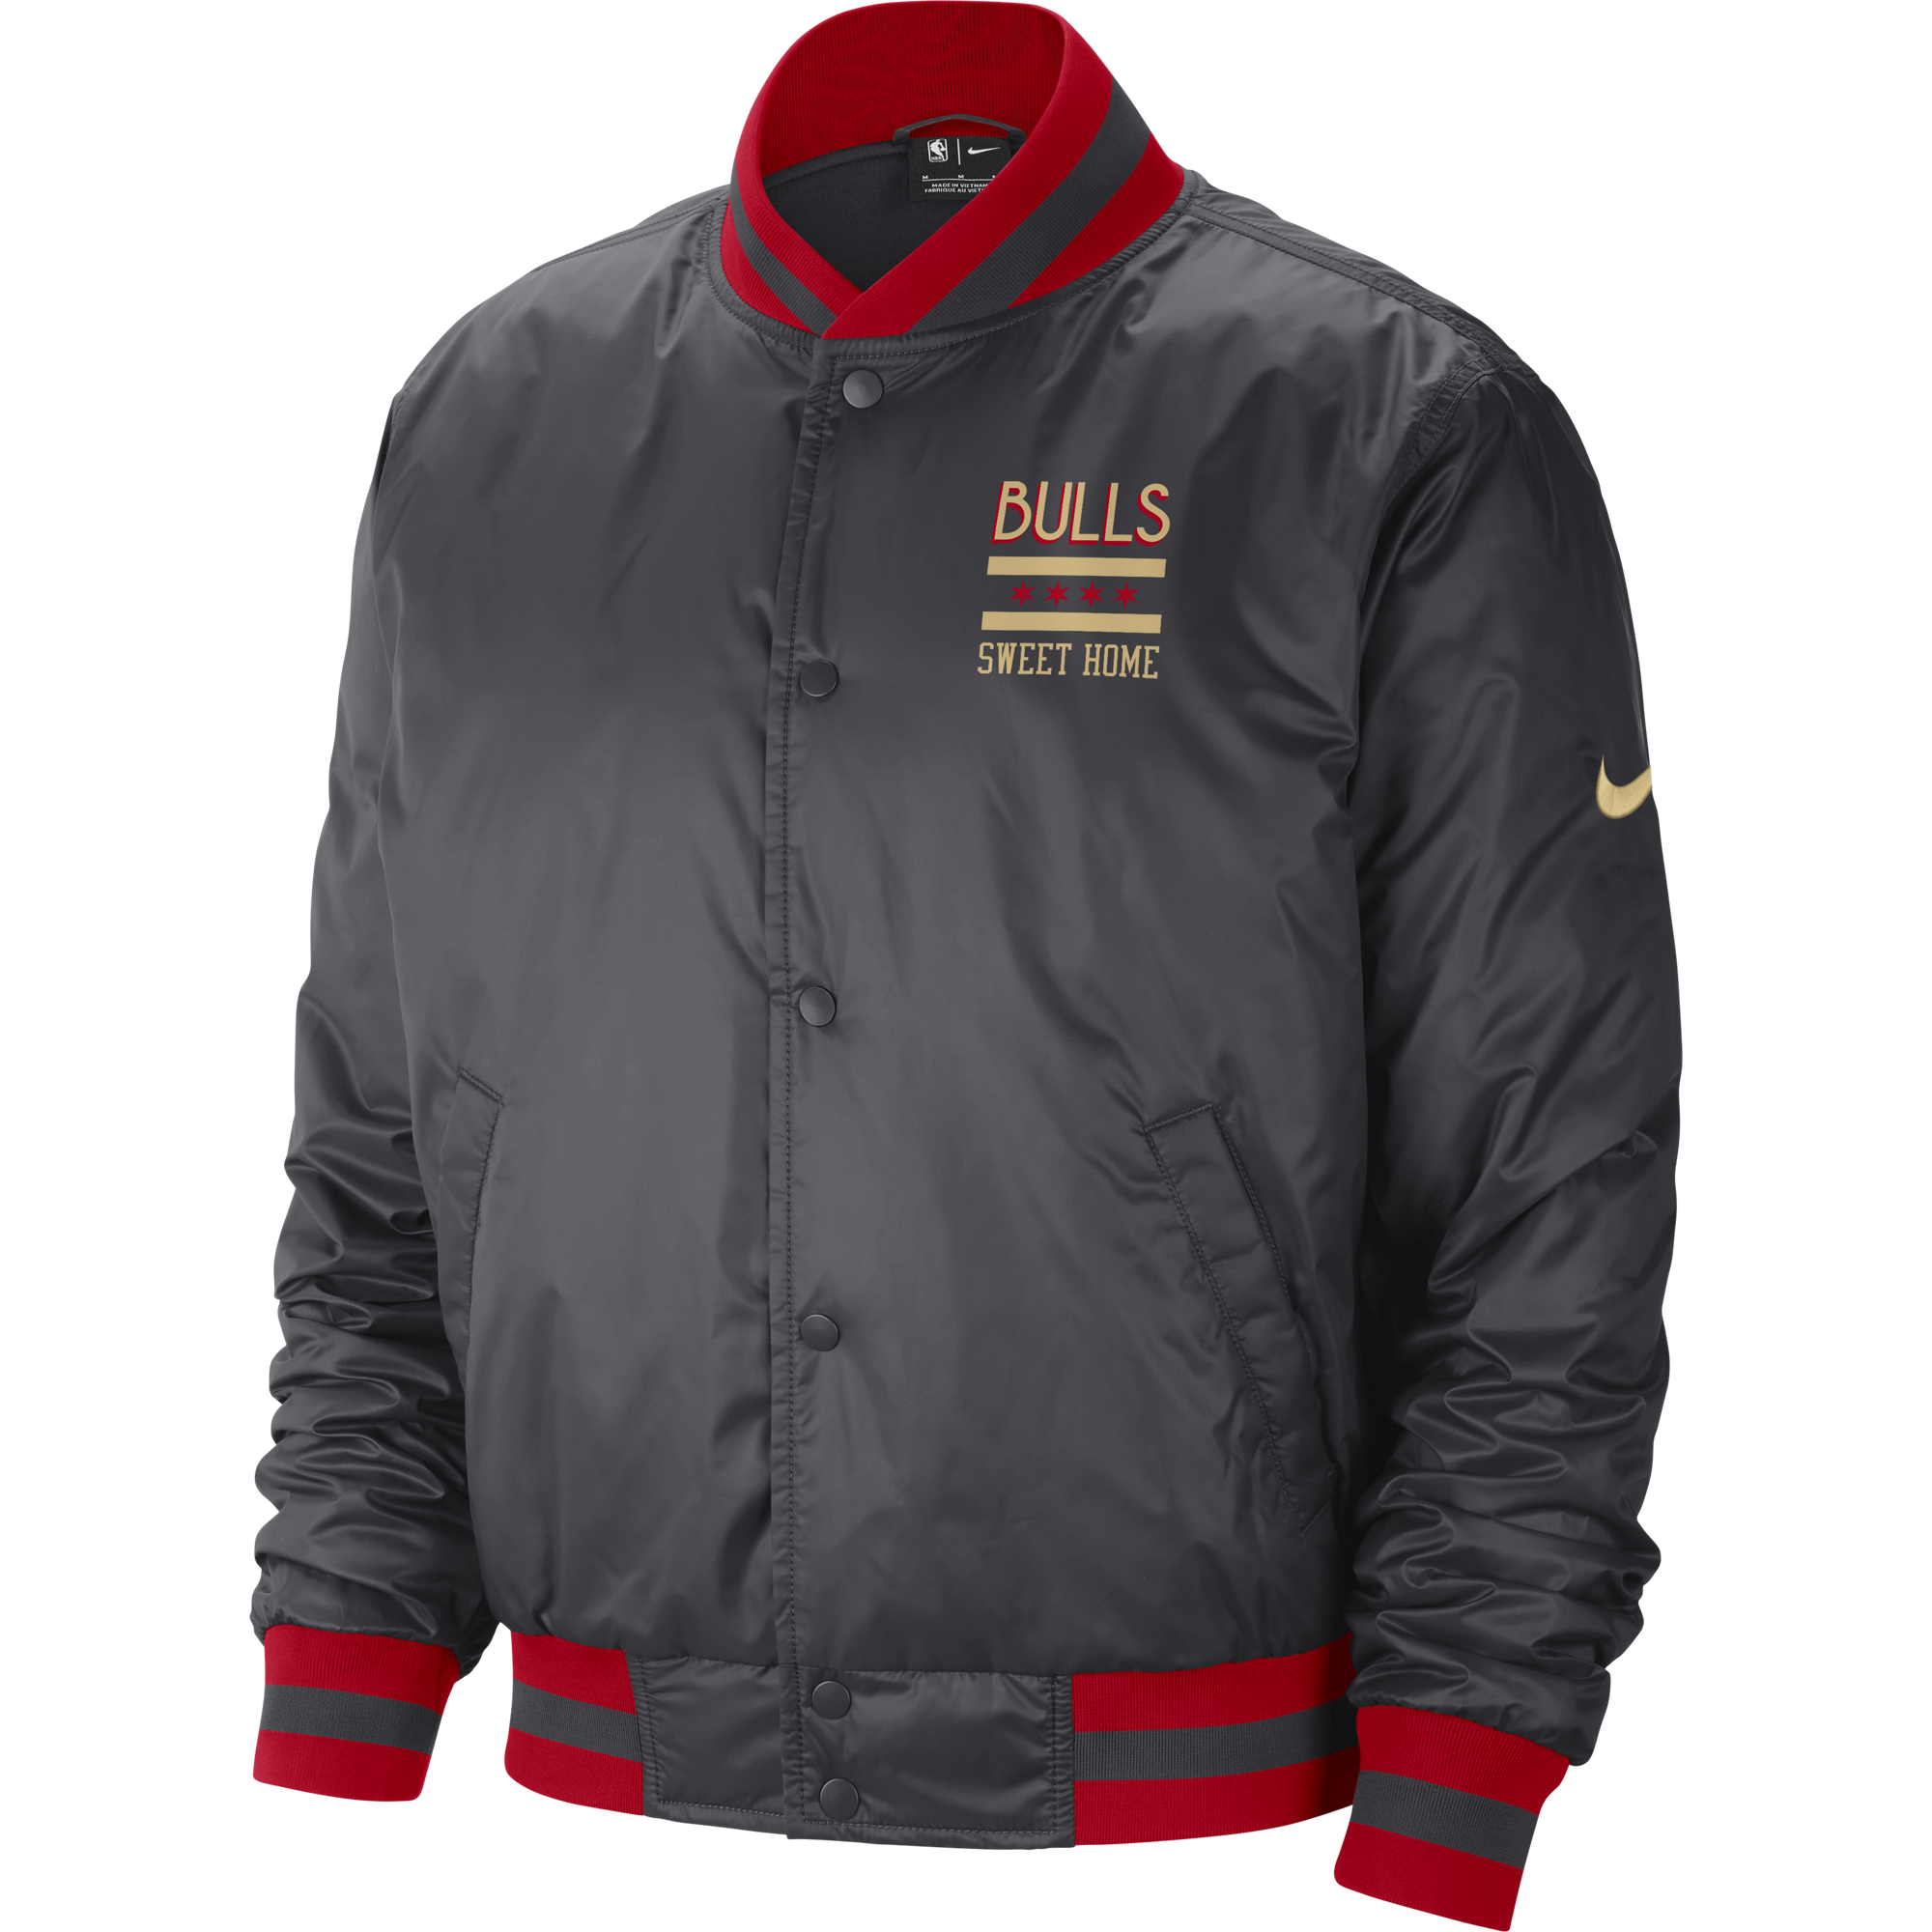 NIKE NBA CHICAGO BULLS CITY EDITION COURTSIDE JACKET ANTHRACITE for £130.00